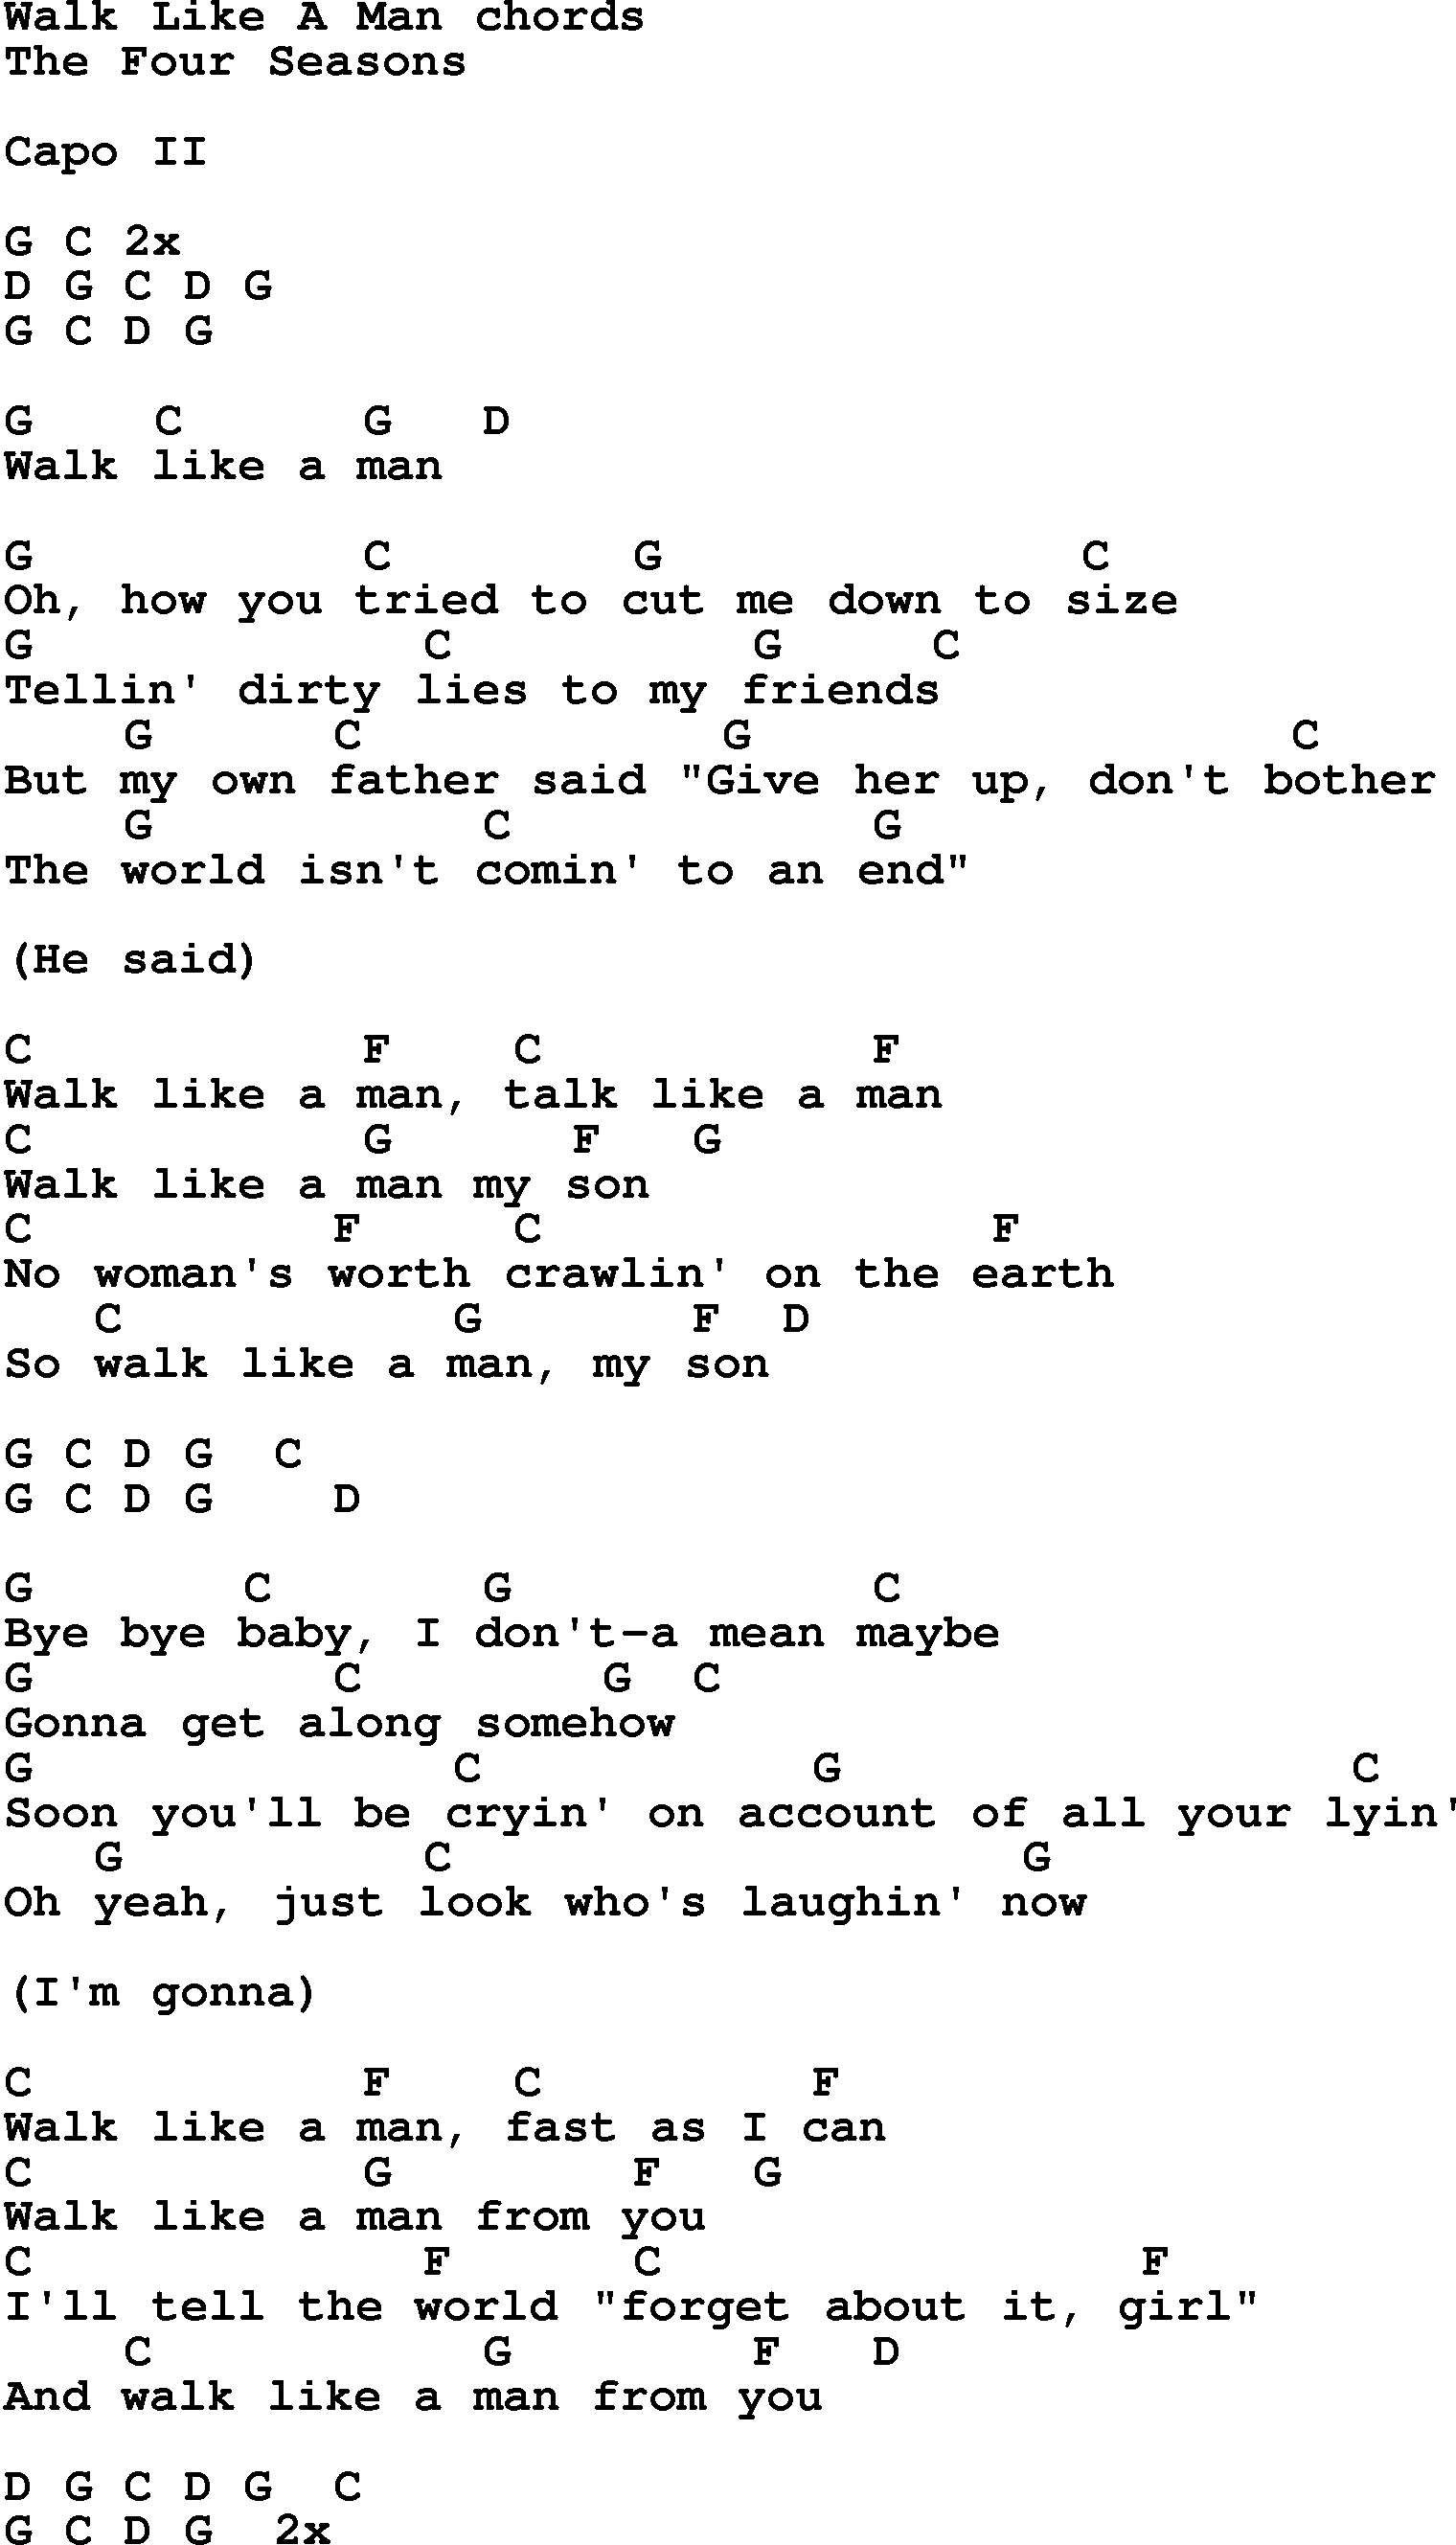 Song Lyrics with guitar chords for Walk Like A Man